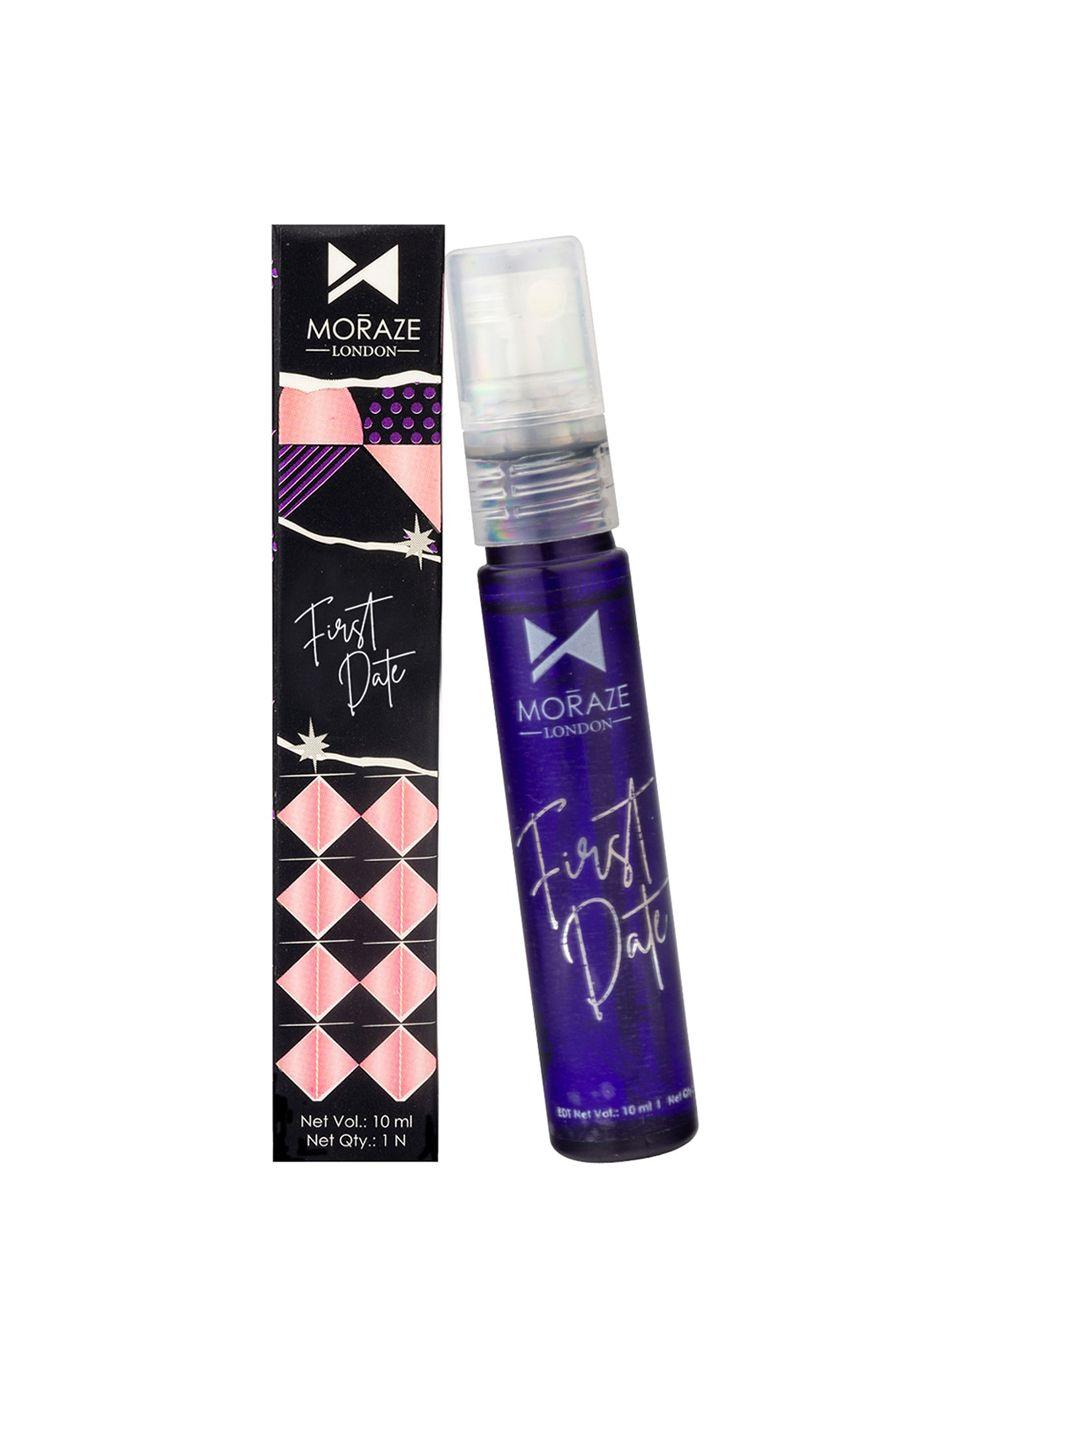 moraze first date long-lasting no gas fragrance exclusive collection perfume - 10ml